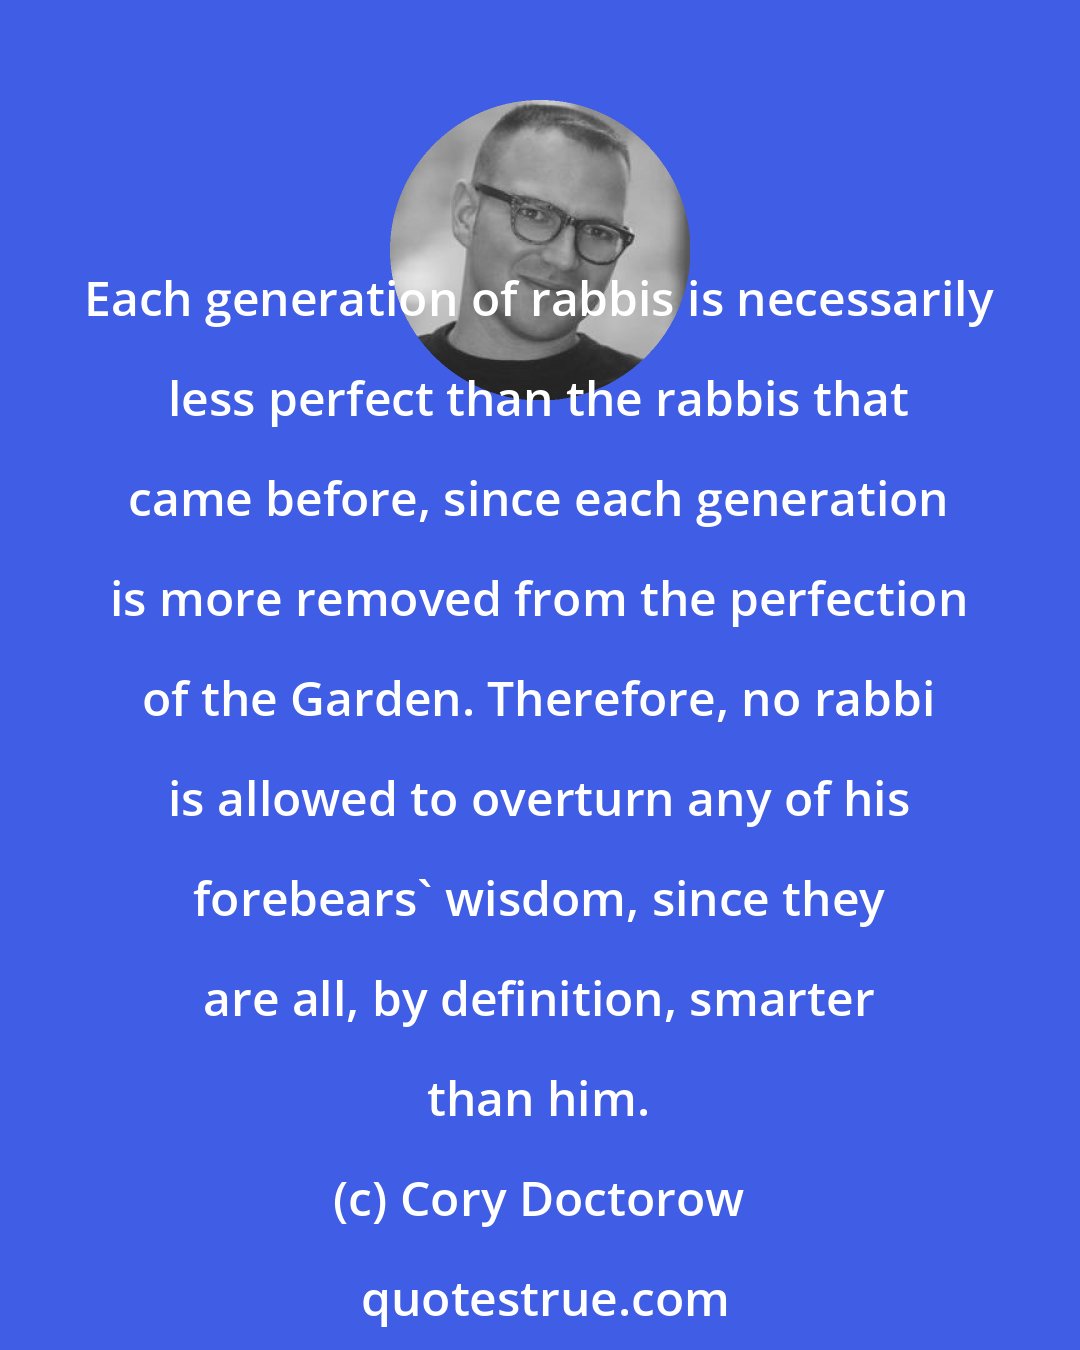 Cory Doctorow: Each generation of rabbis is necessarily less perfect than the rabbis that came before, since each generation is more removed from the perfection of the Garden. Therefore, no rabbi is allowed to overturn any of his forebears' wisdom, since they are all, by definition, smarter than him.